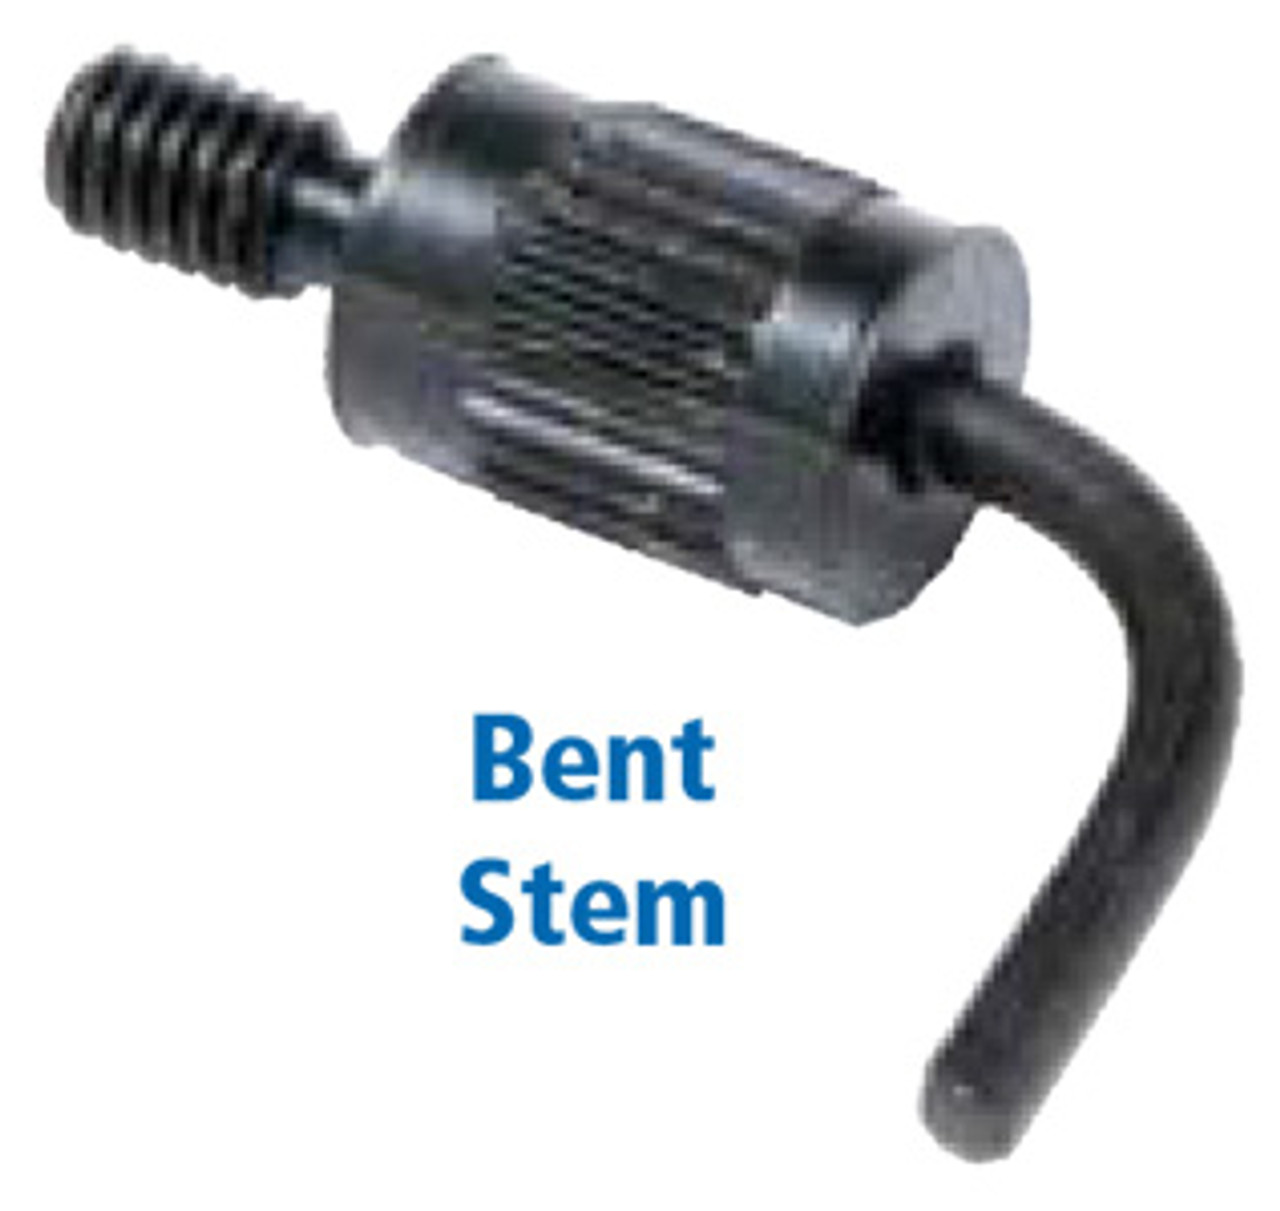 Accurate Manufactured Products Group Stem Indicator Point Bent Stem Z9333 Penn Tool Co Inc